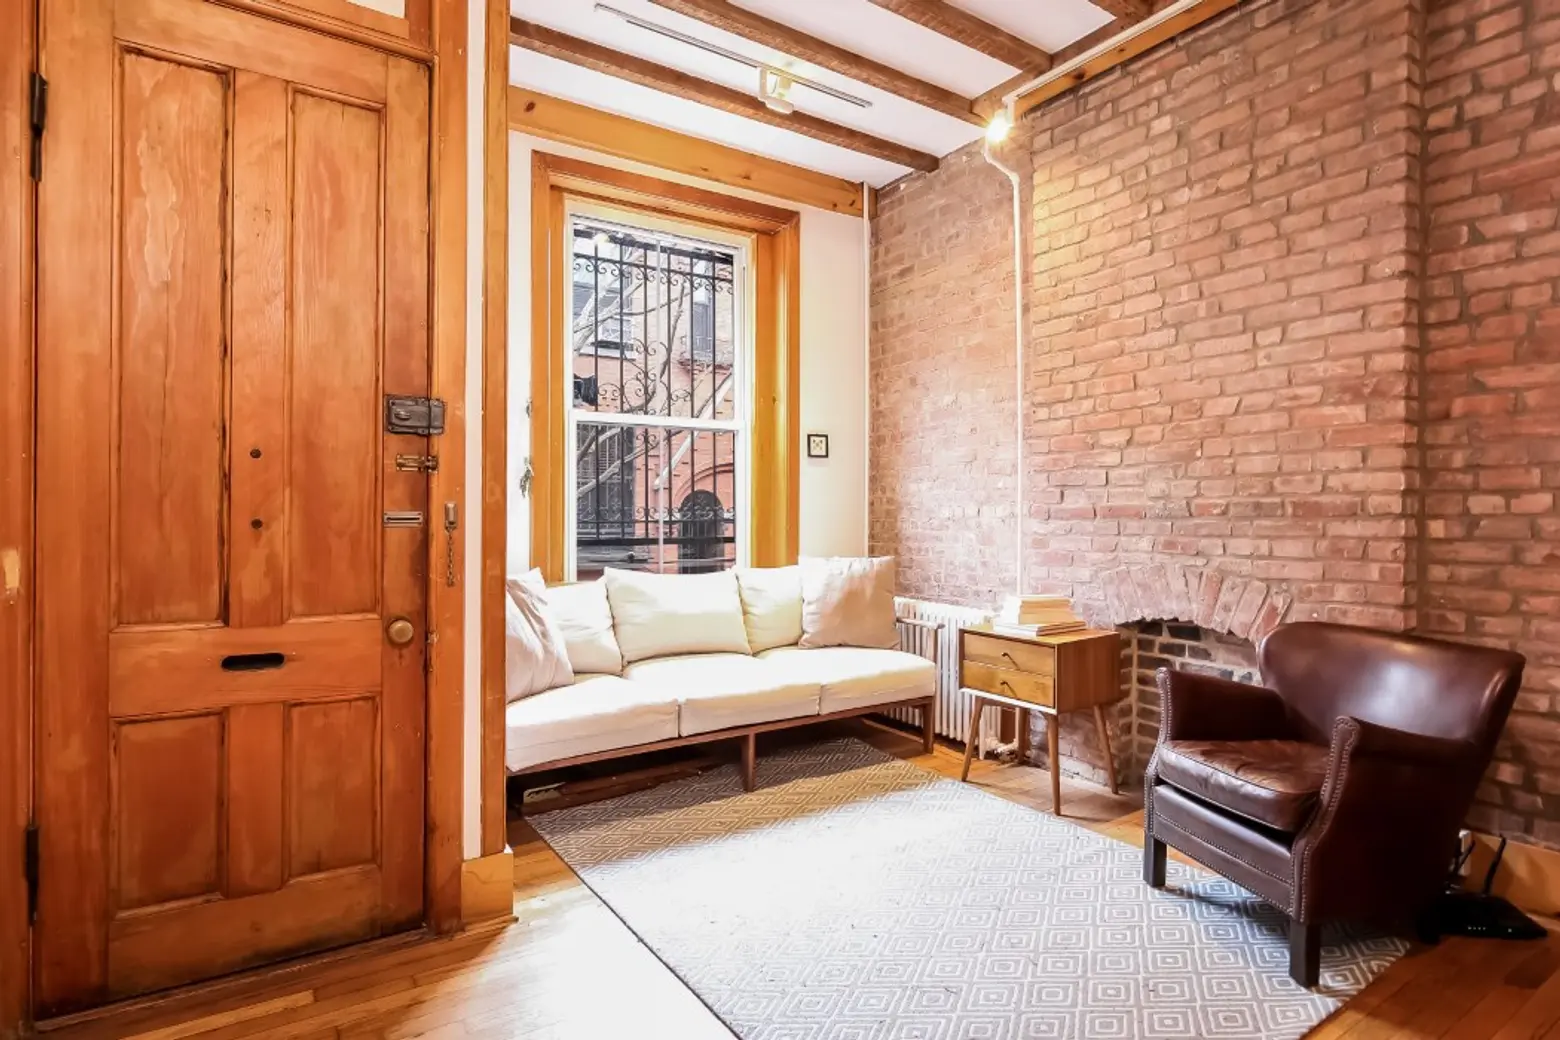 Former Workman’s Cottage in the Warren Place Mews Now Asks $4,900 a Month